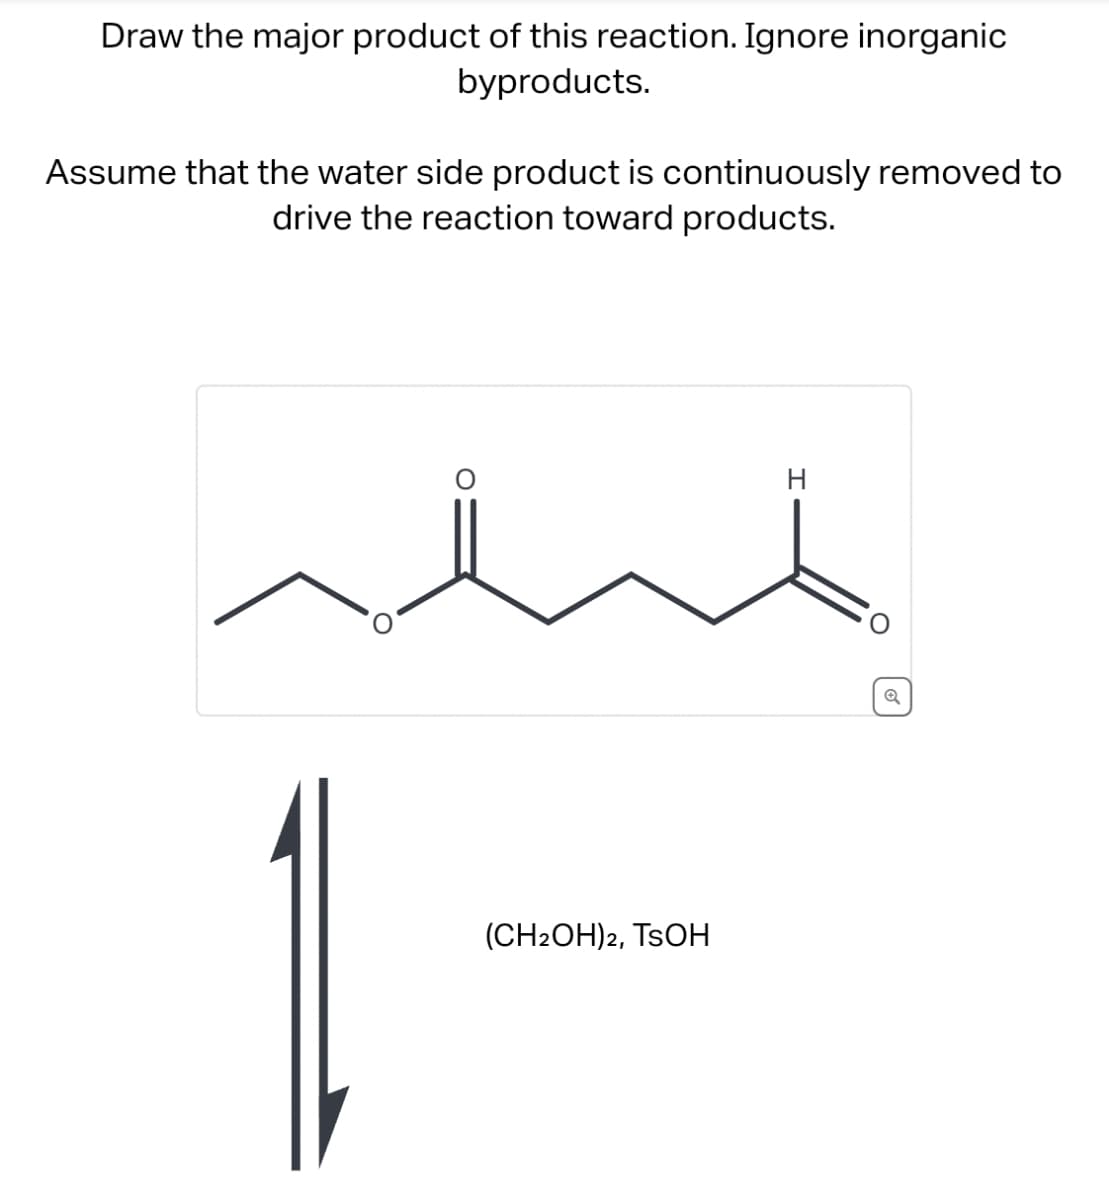 Draw the major product of this reaction. Ignore inorganic
byproducts.
Assume that the water side product is continuously removed to
drive the reaction toward products.
(CH2OH)2, TSOH
H
Q